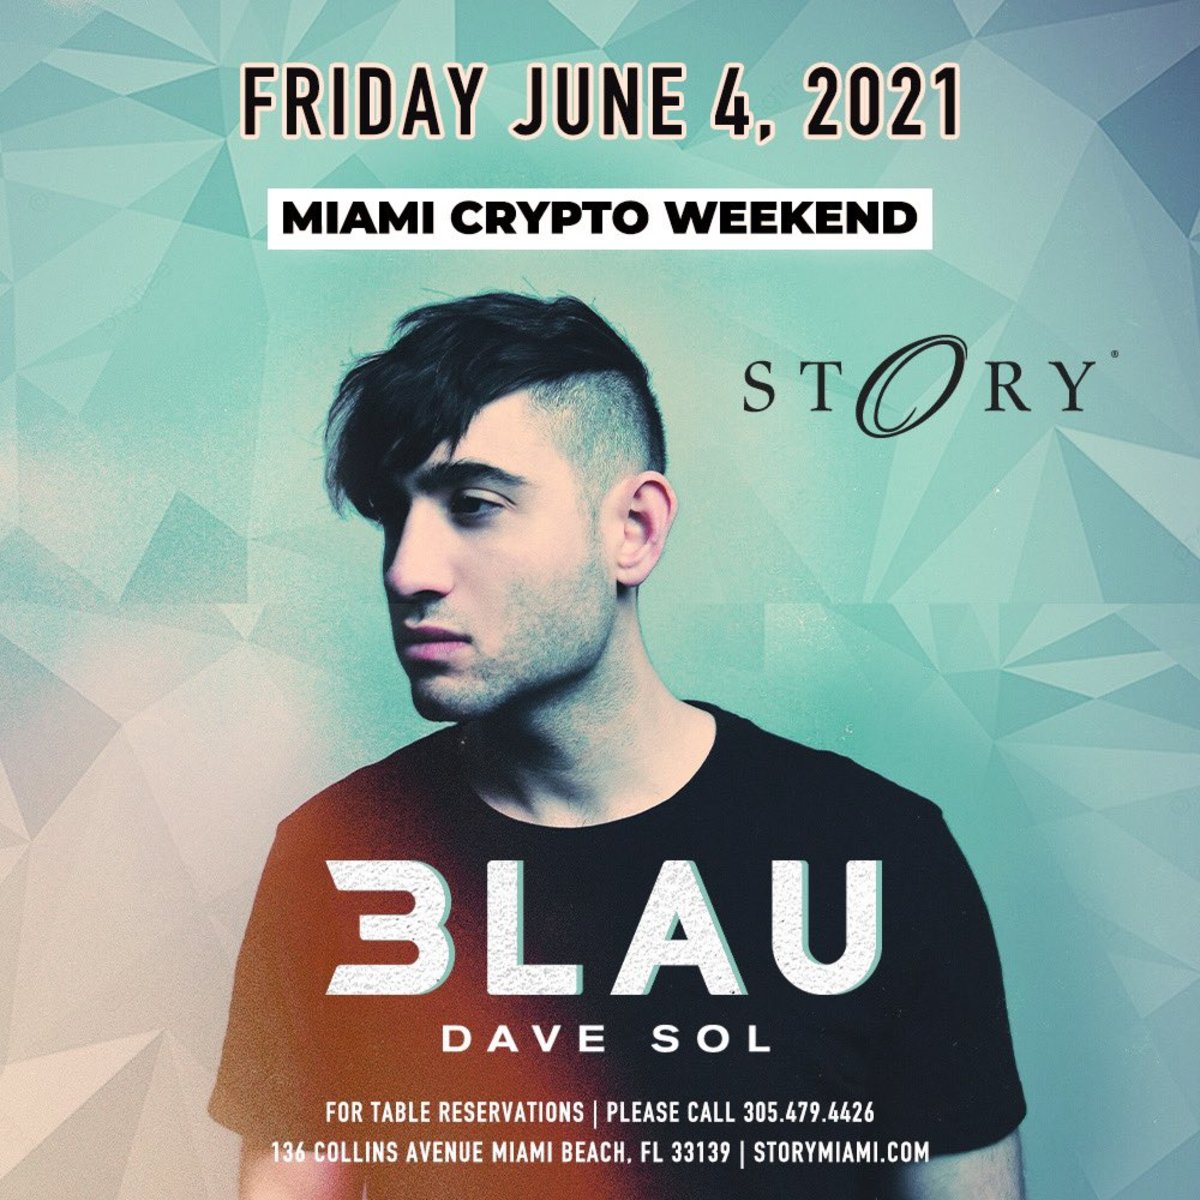 Flyer for 3LAU's upcoming performance at Miami's STORY Nightclub during the world's largest cryptocurrency conference.